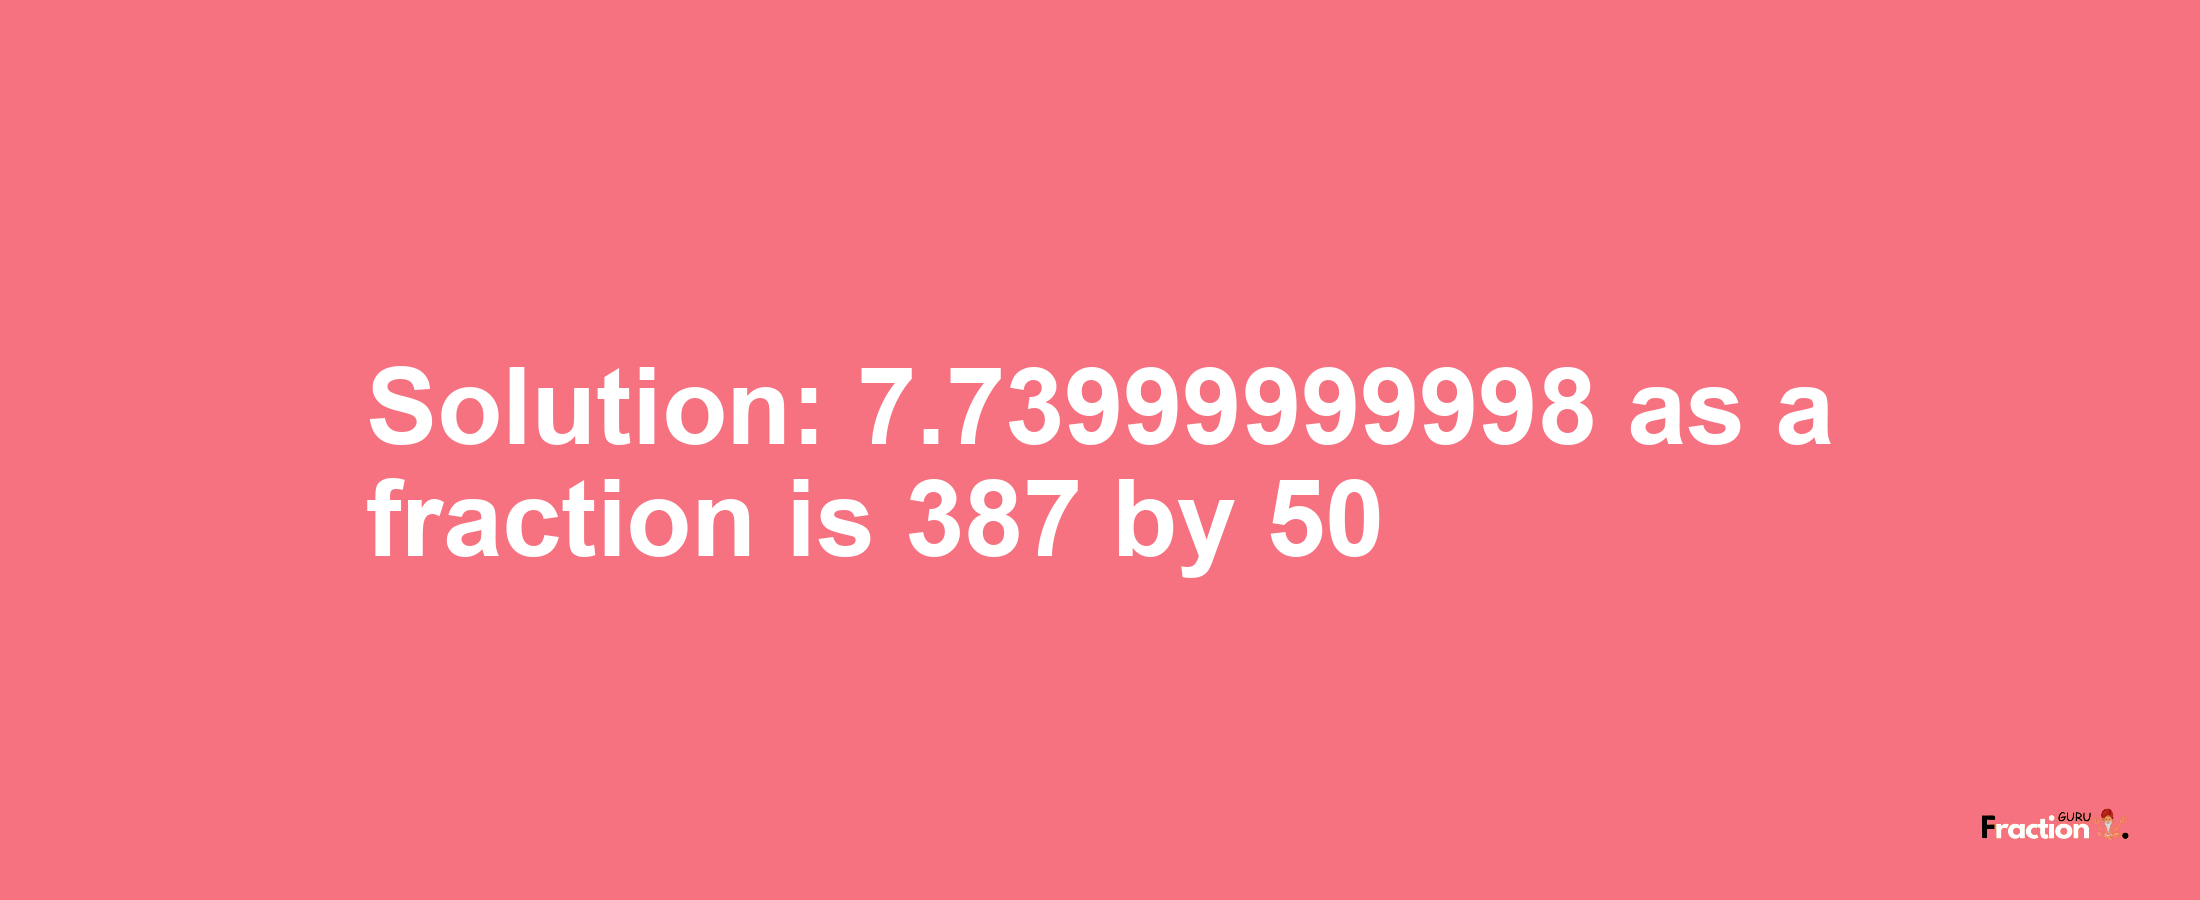 Solution:7.73999999998 as a fraction is 387/50